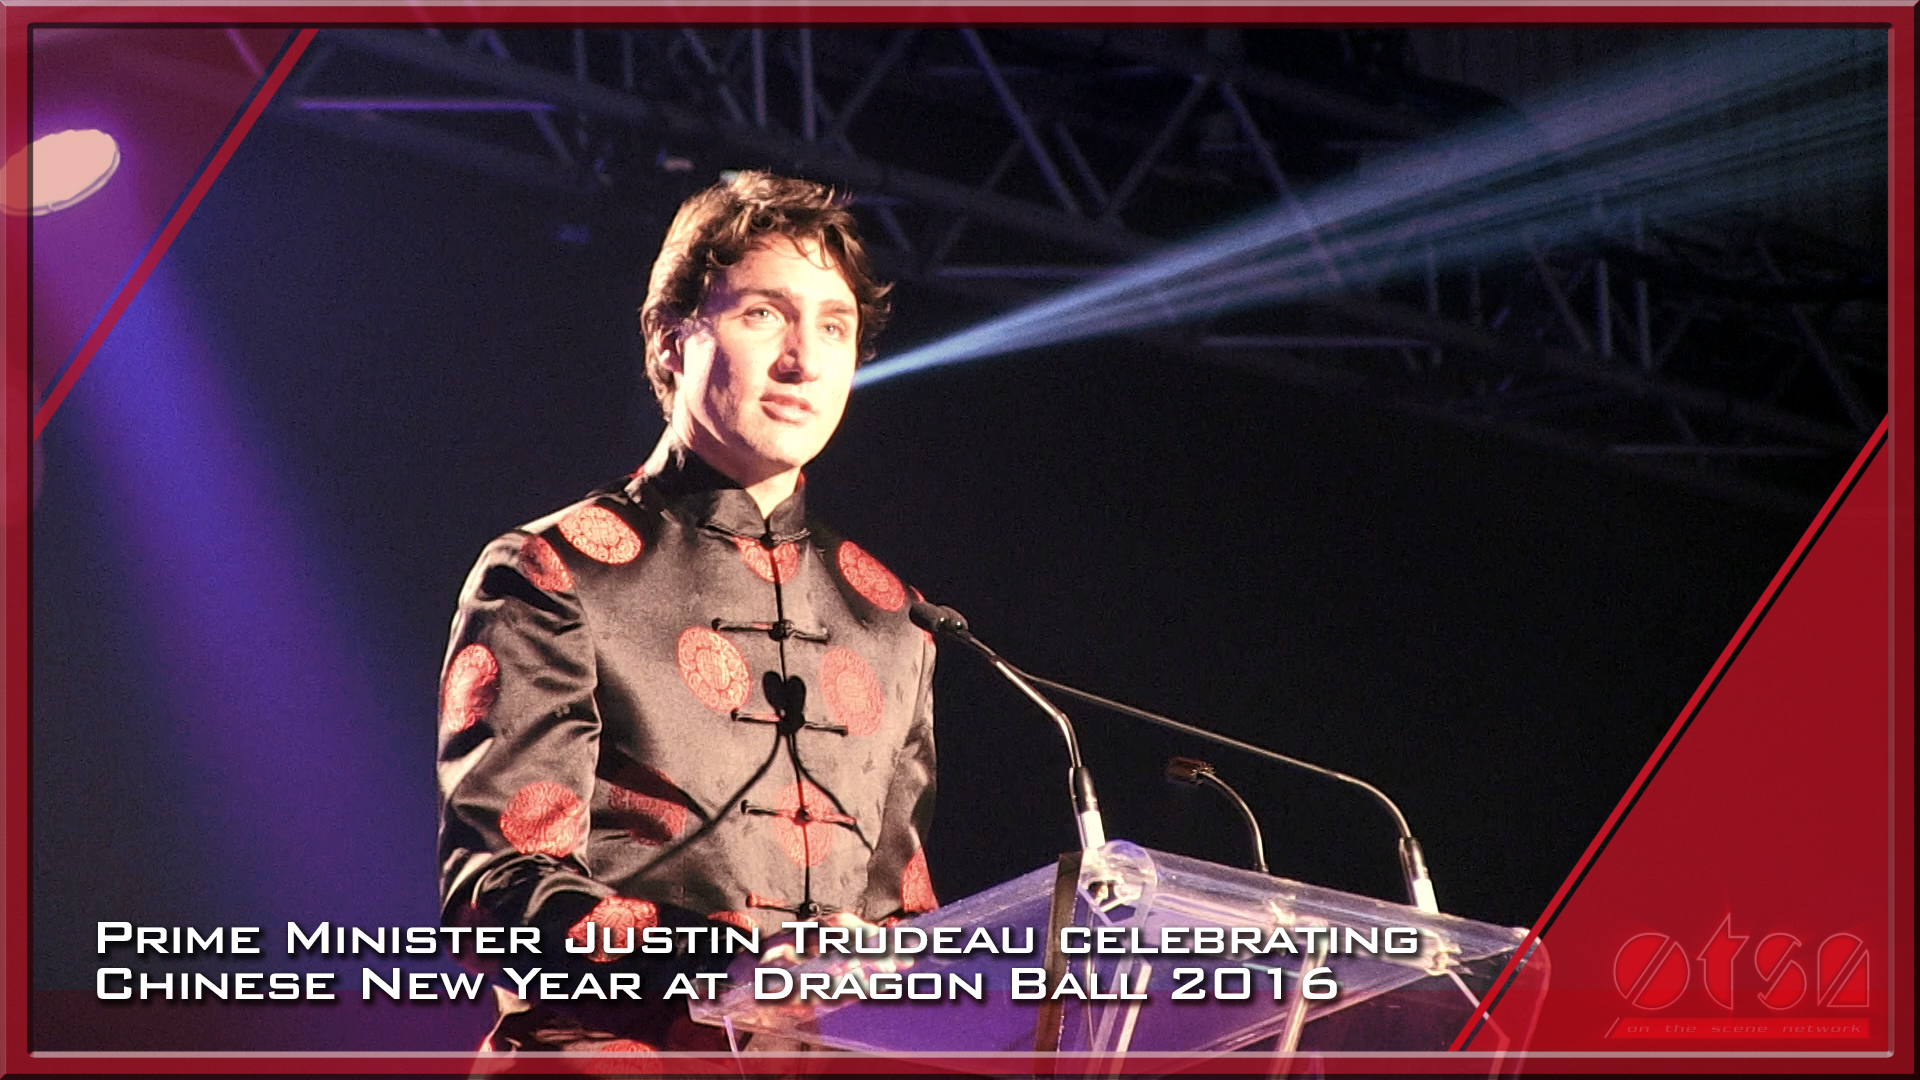 Justin Trudeau celebrating Chinese New Year at Dragon Ball 2016